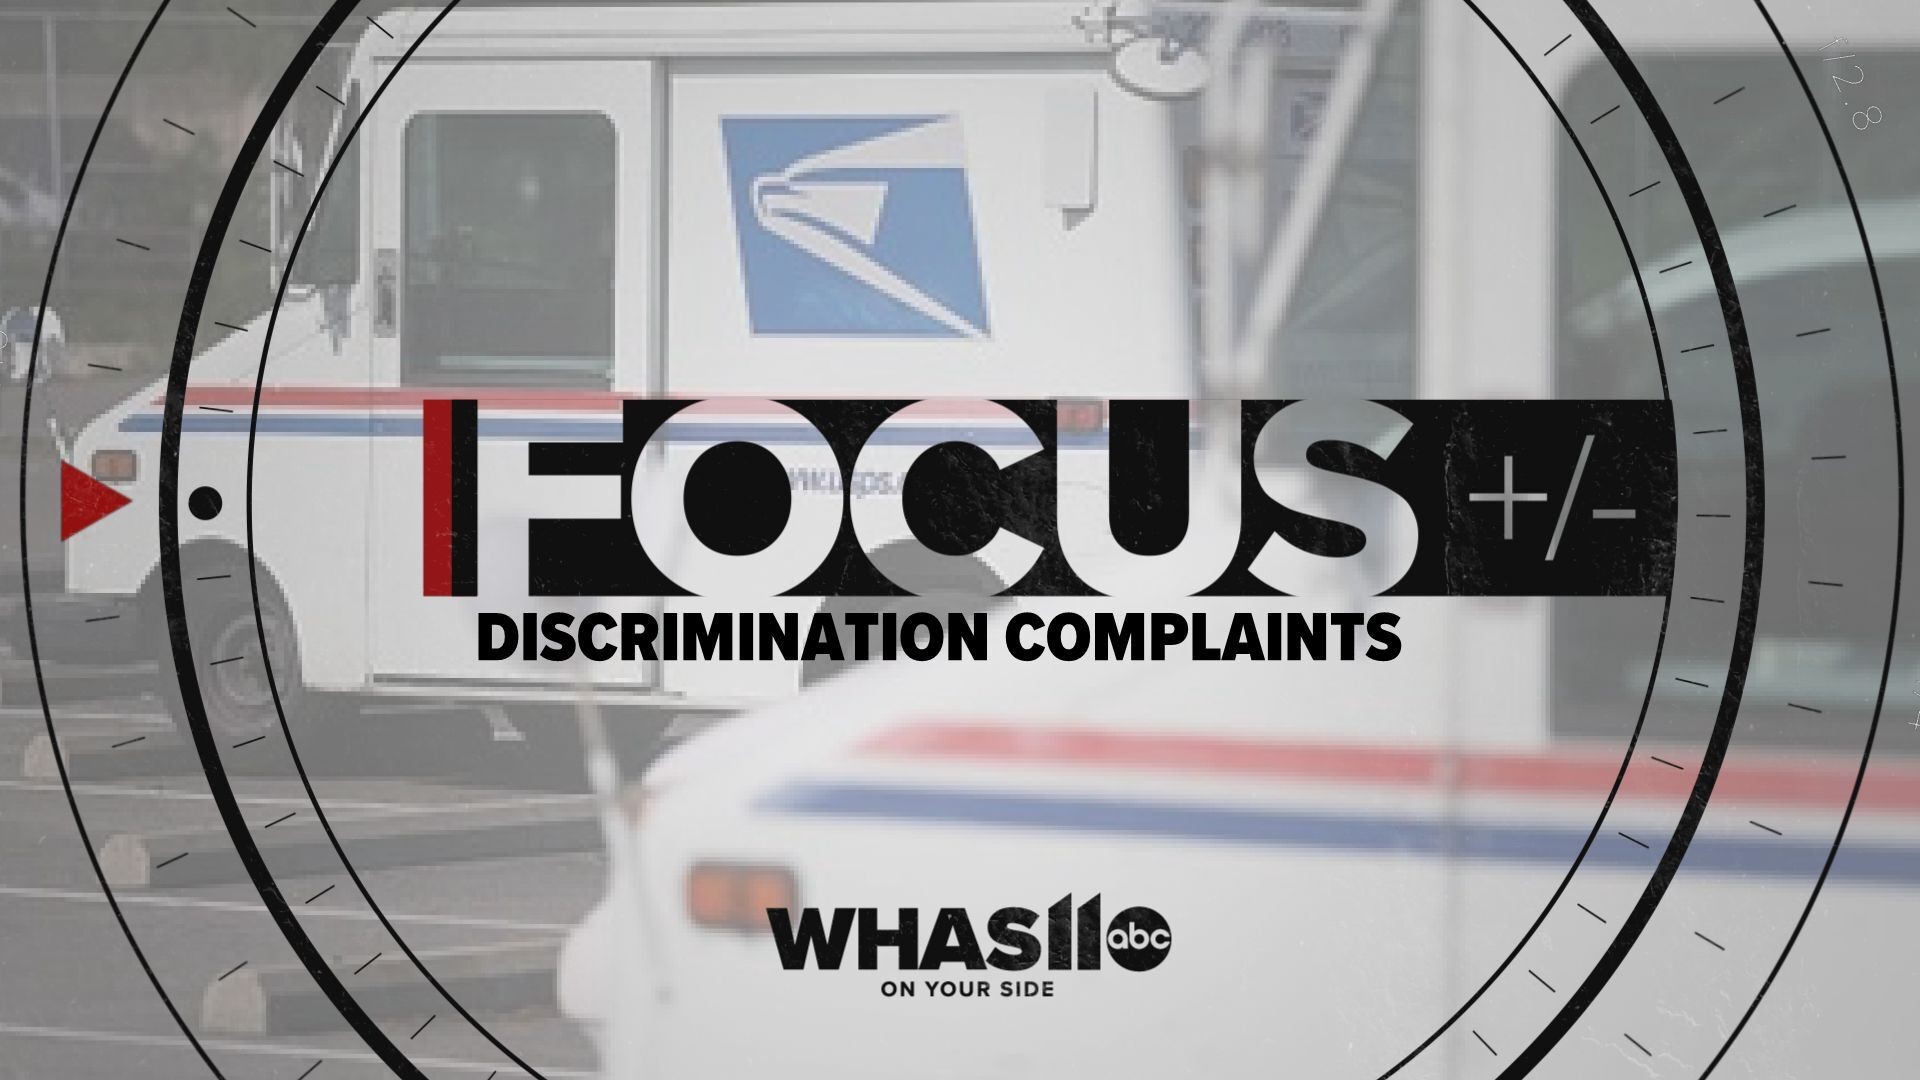 Christian Sugg, a USPS worker, has filed a complaint with the Equal Employment Opportunity Commission.